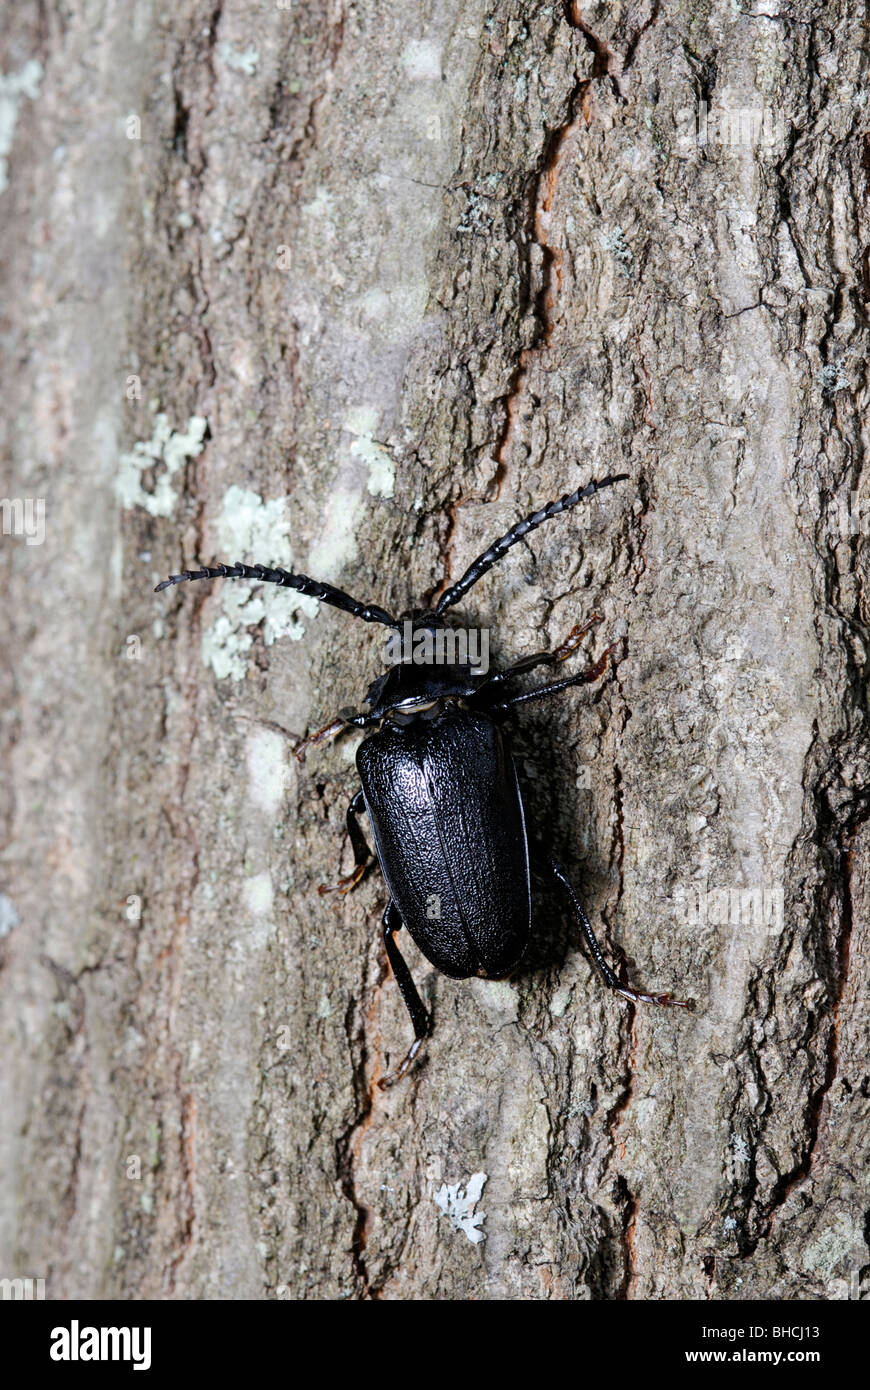 Broad-necked root borer, Prionus laticollis on the side of a tree. Stock Photo